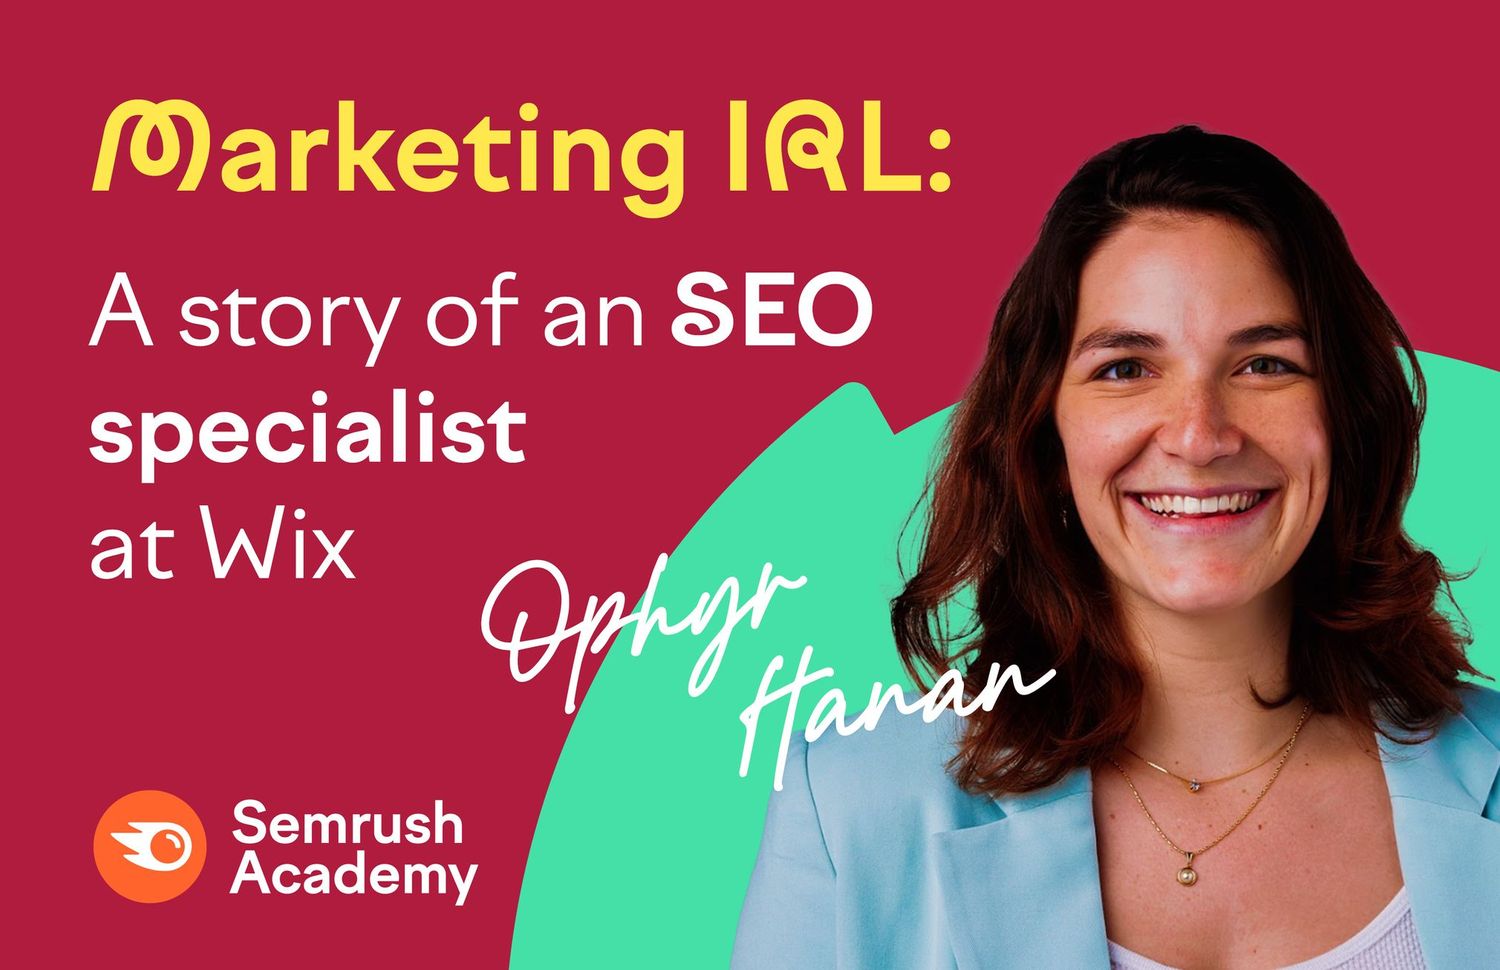 Story of an SEO Specialist at Wix